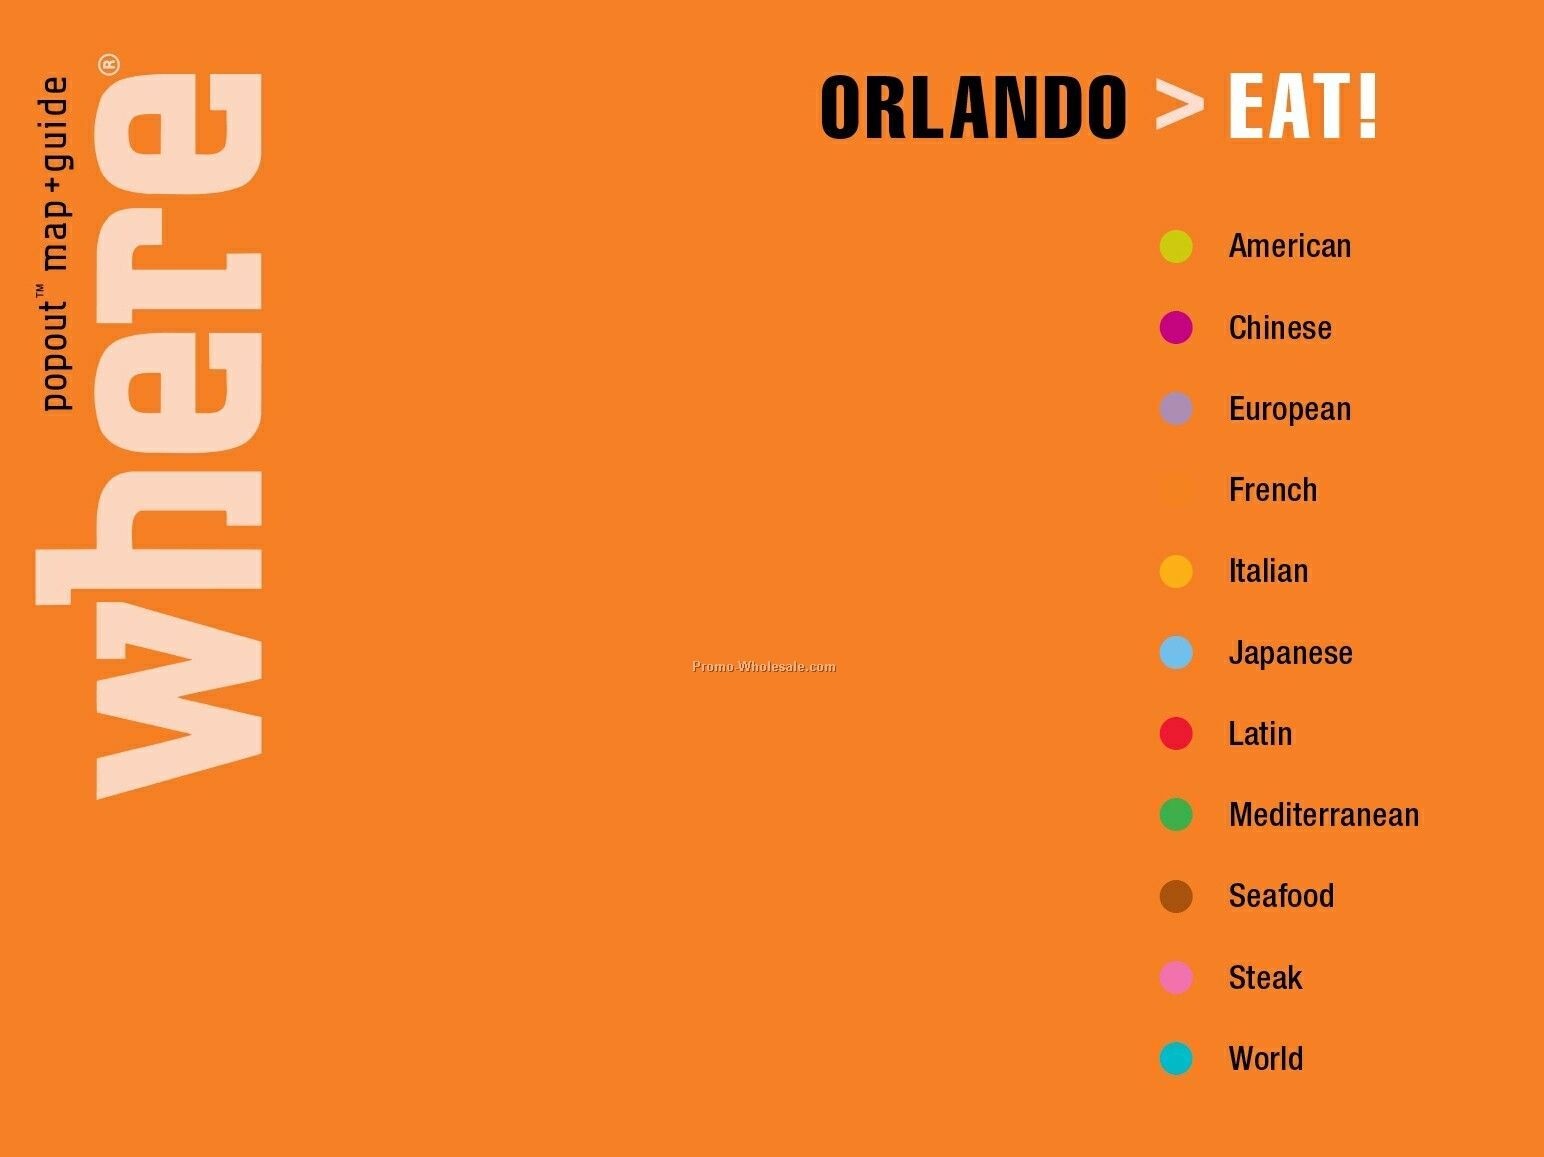 Travel Guides - Eat! Orlando - Featuring Popout Maps